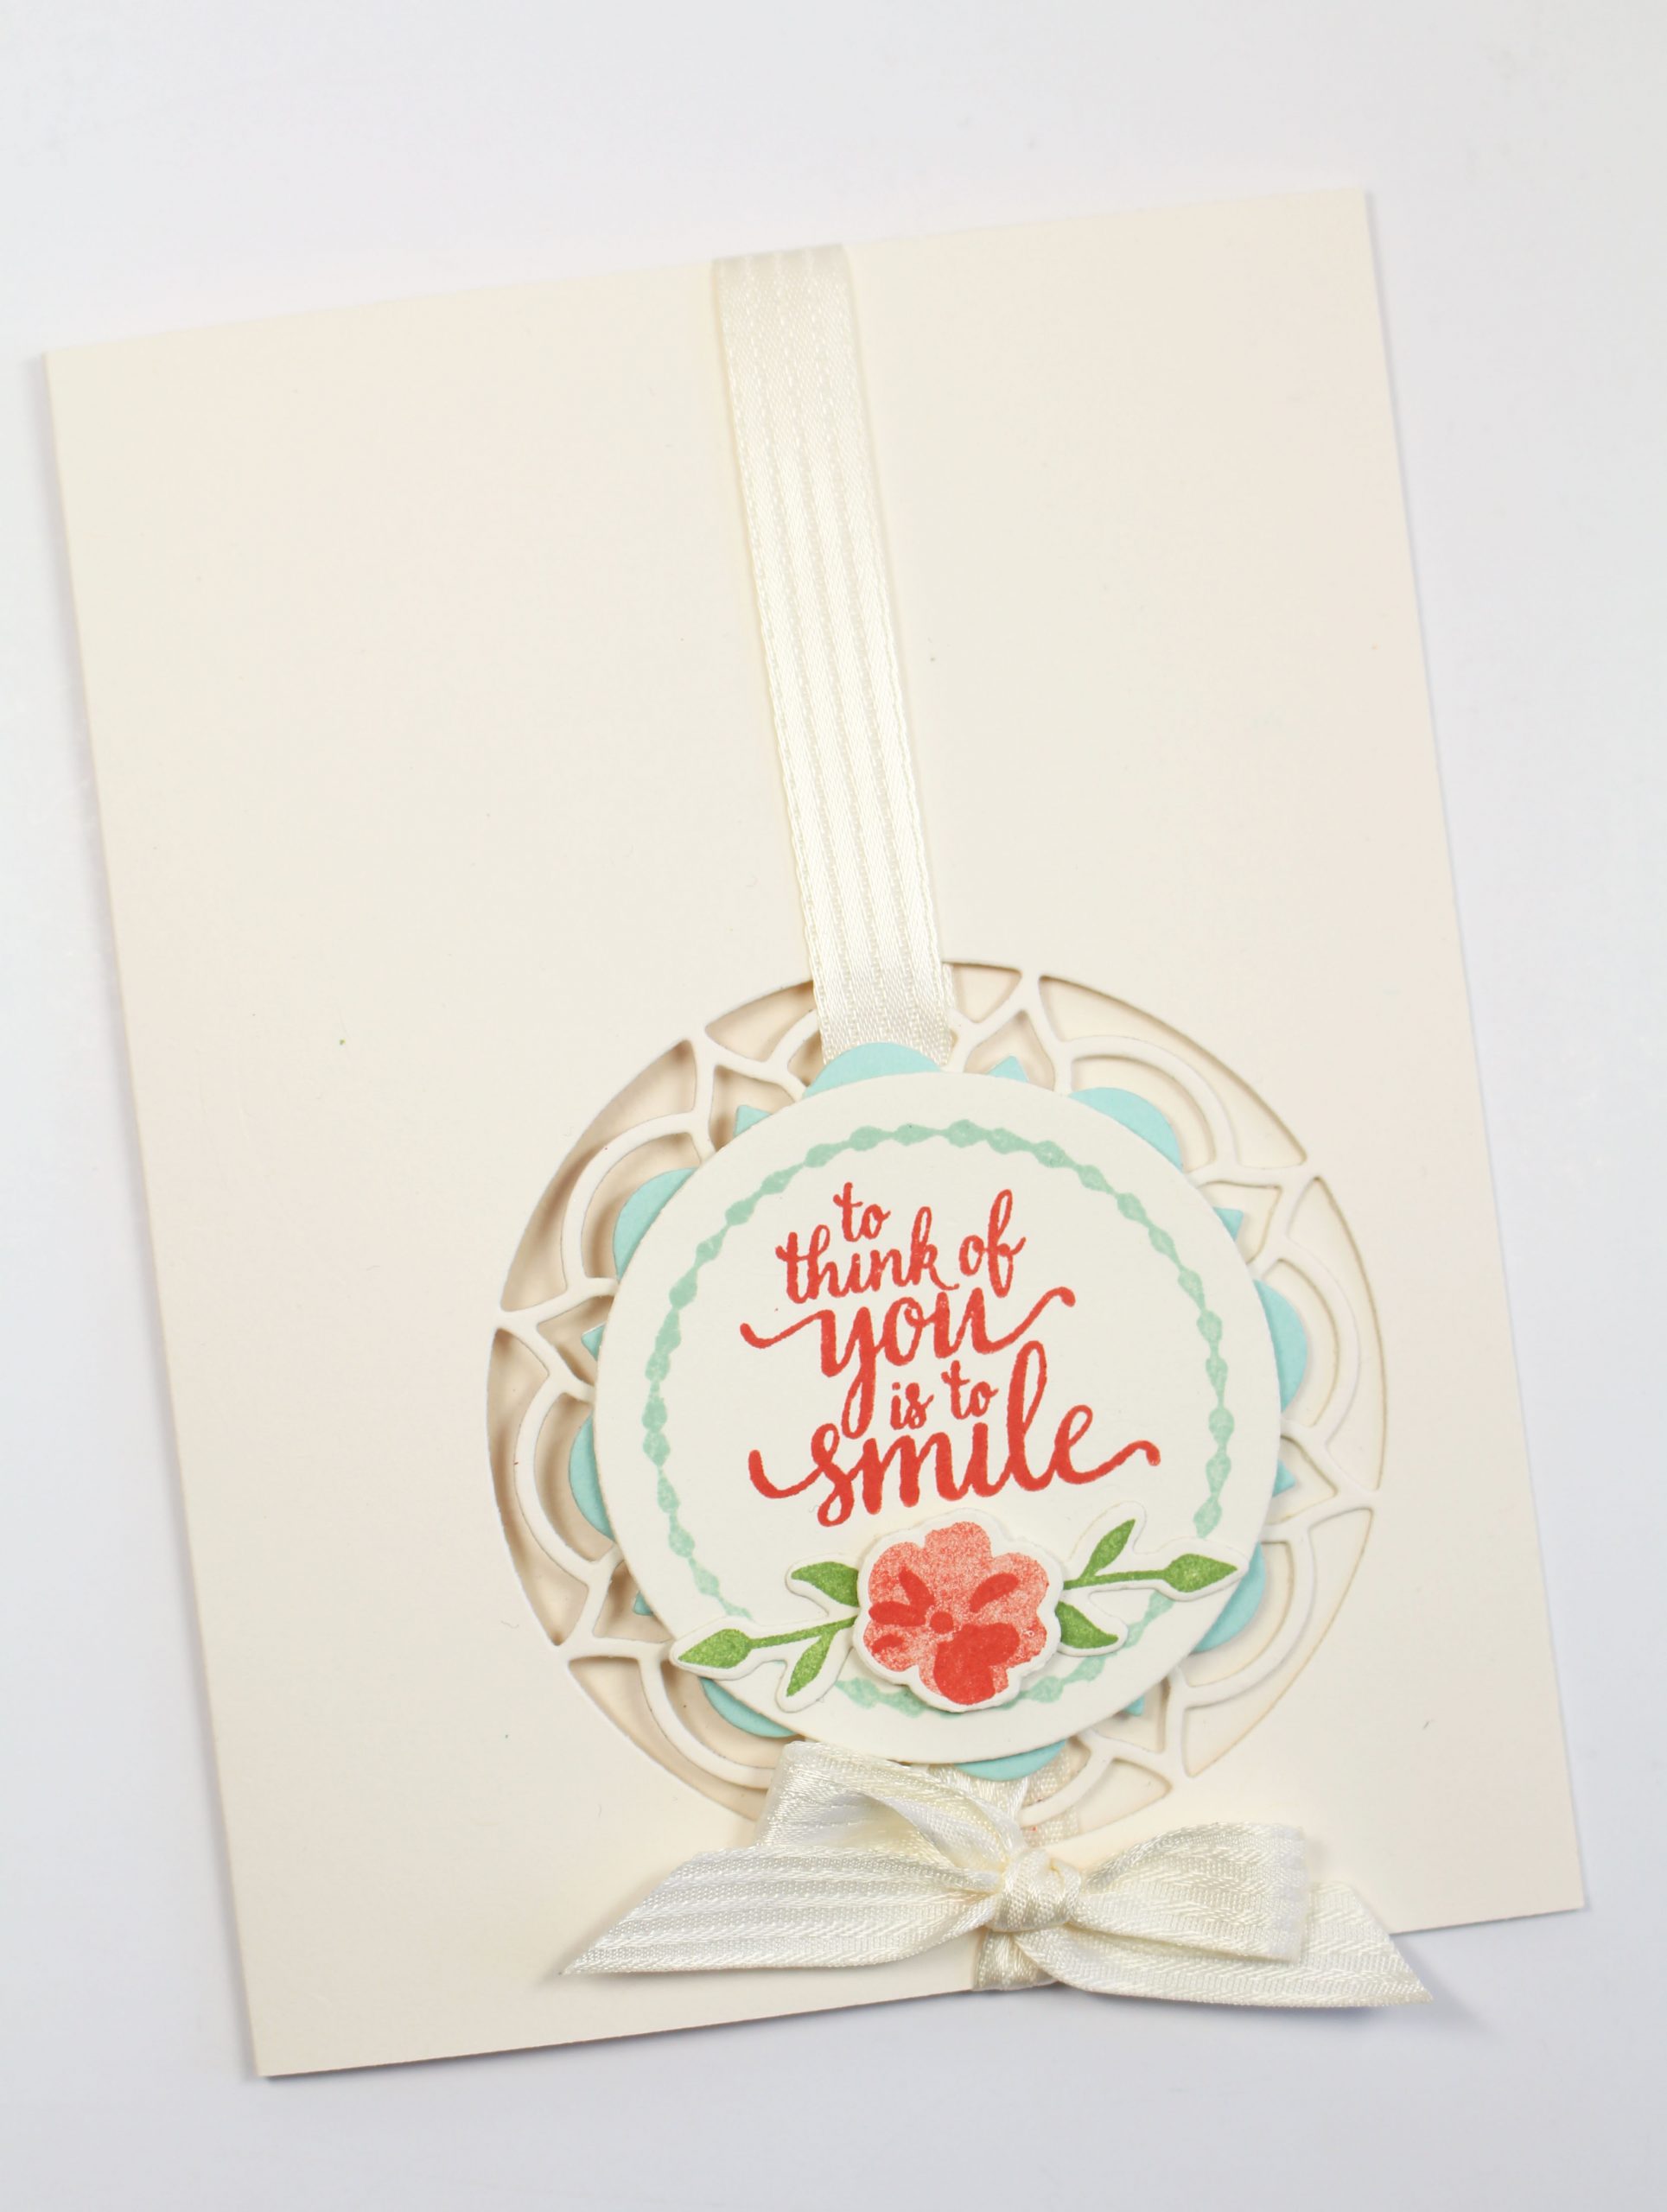 Stampin Up Eastern Palace Bundles are now available to everyone!